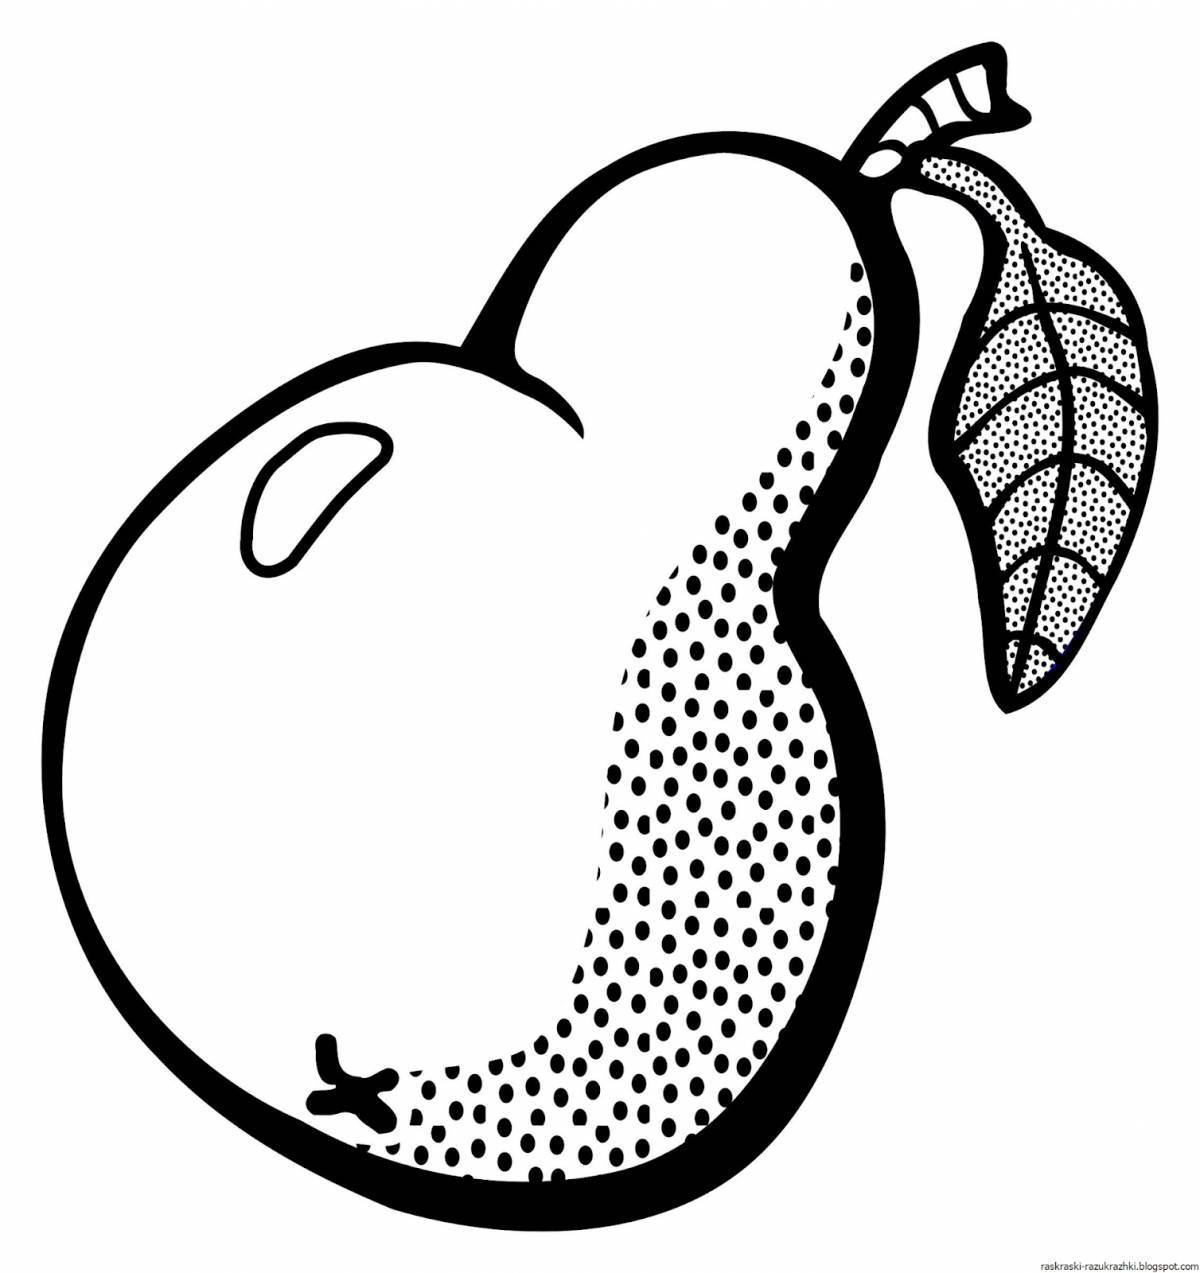 Adorable pear coloring book for kids